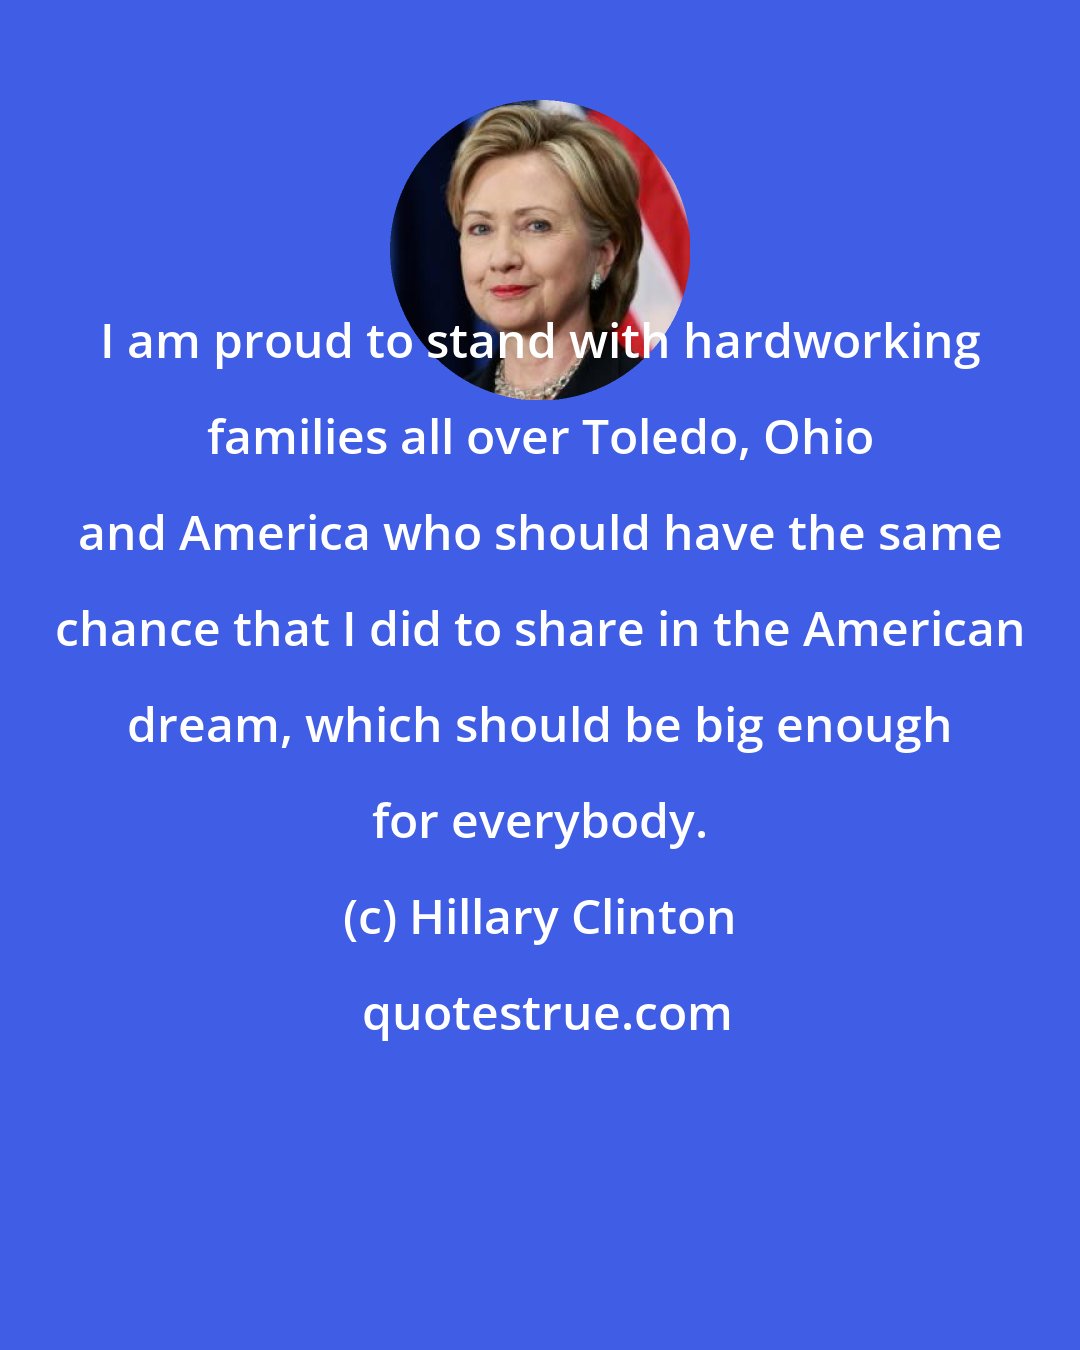 Hillary Clinton: I am proud to stand with hardworking families all over Toledo, Ohio and America who should have the same chance that I did to share in the American dream, which should be big enough for everybody.